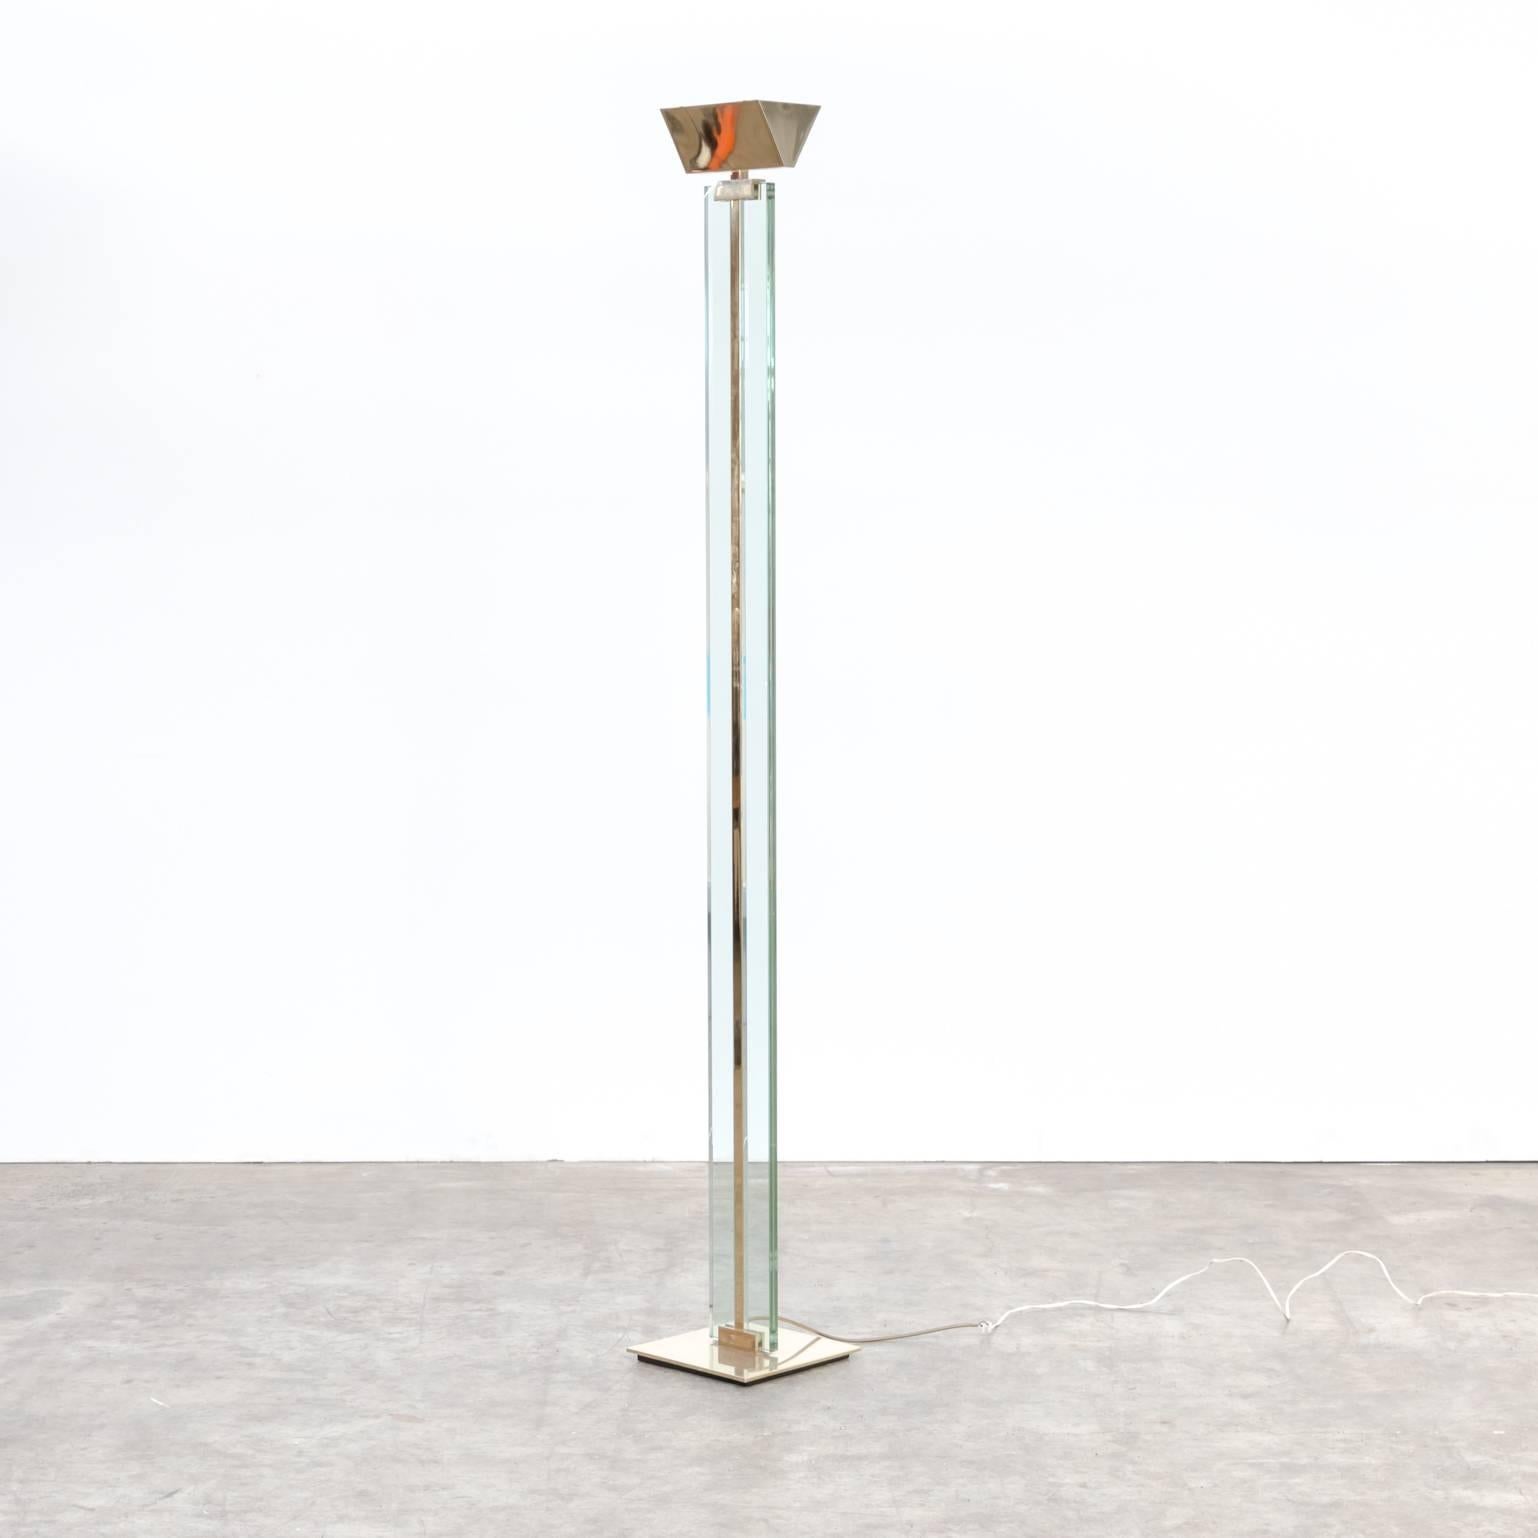 1970s Mauro Martini glass and brass floor lamp for Fratelli Martini. Good and working condition consistent with age and use.